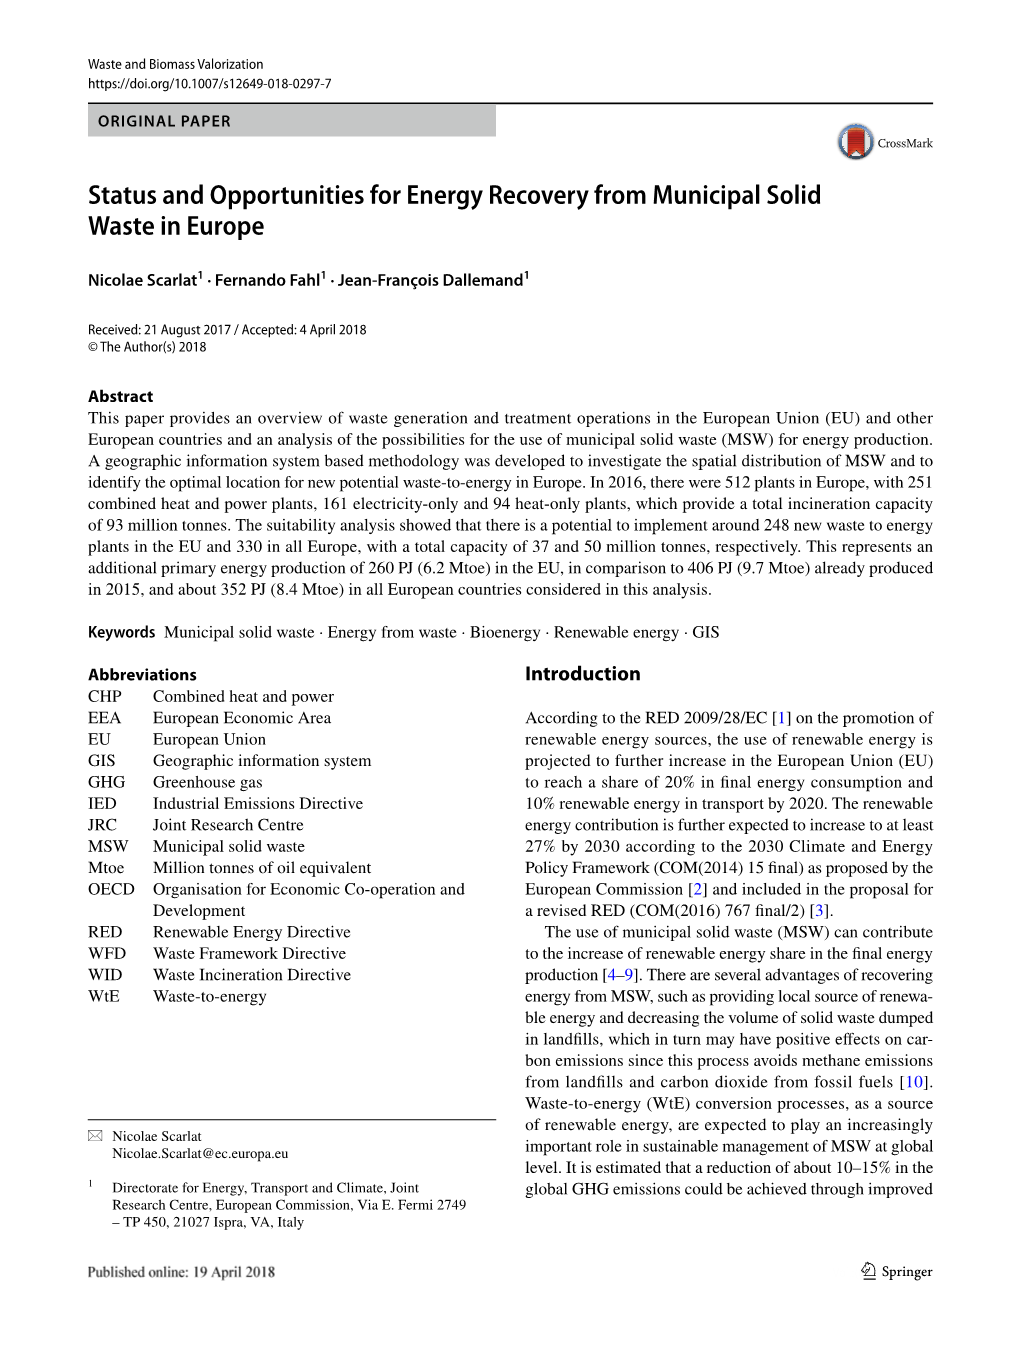 Status and Opportunities for Energy Recovery from Municipal Solid Waste in Europe